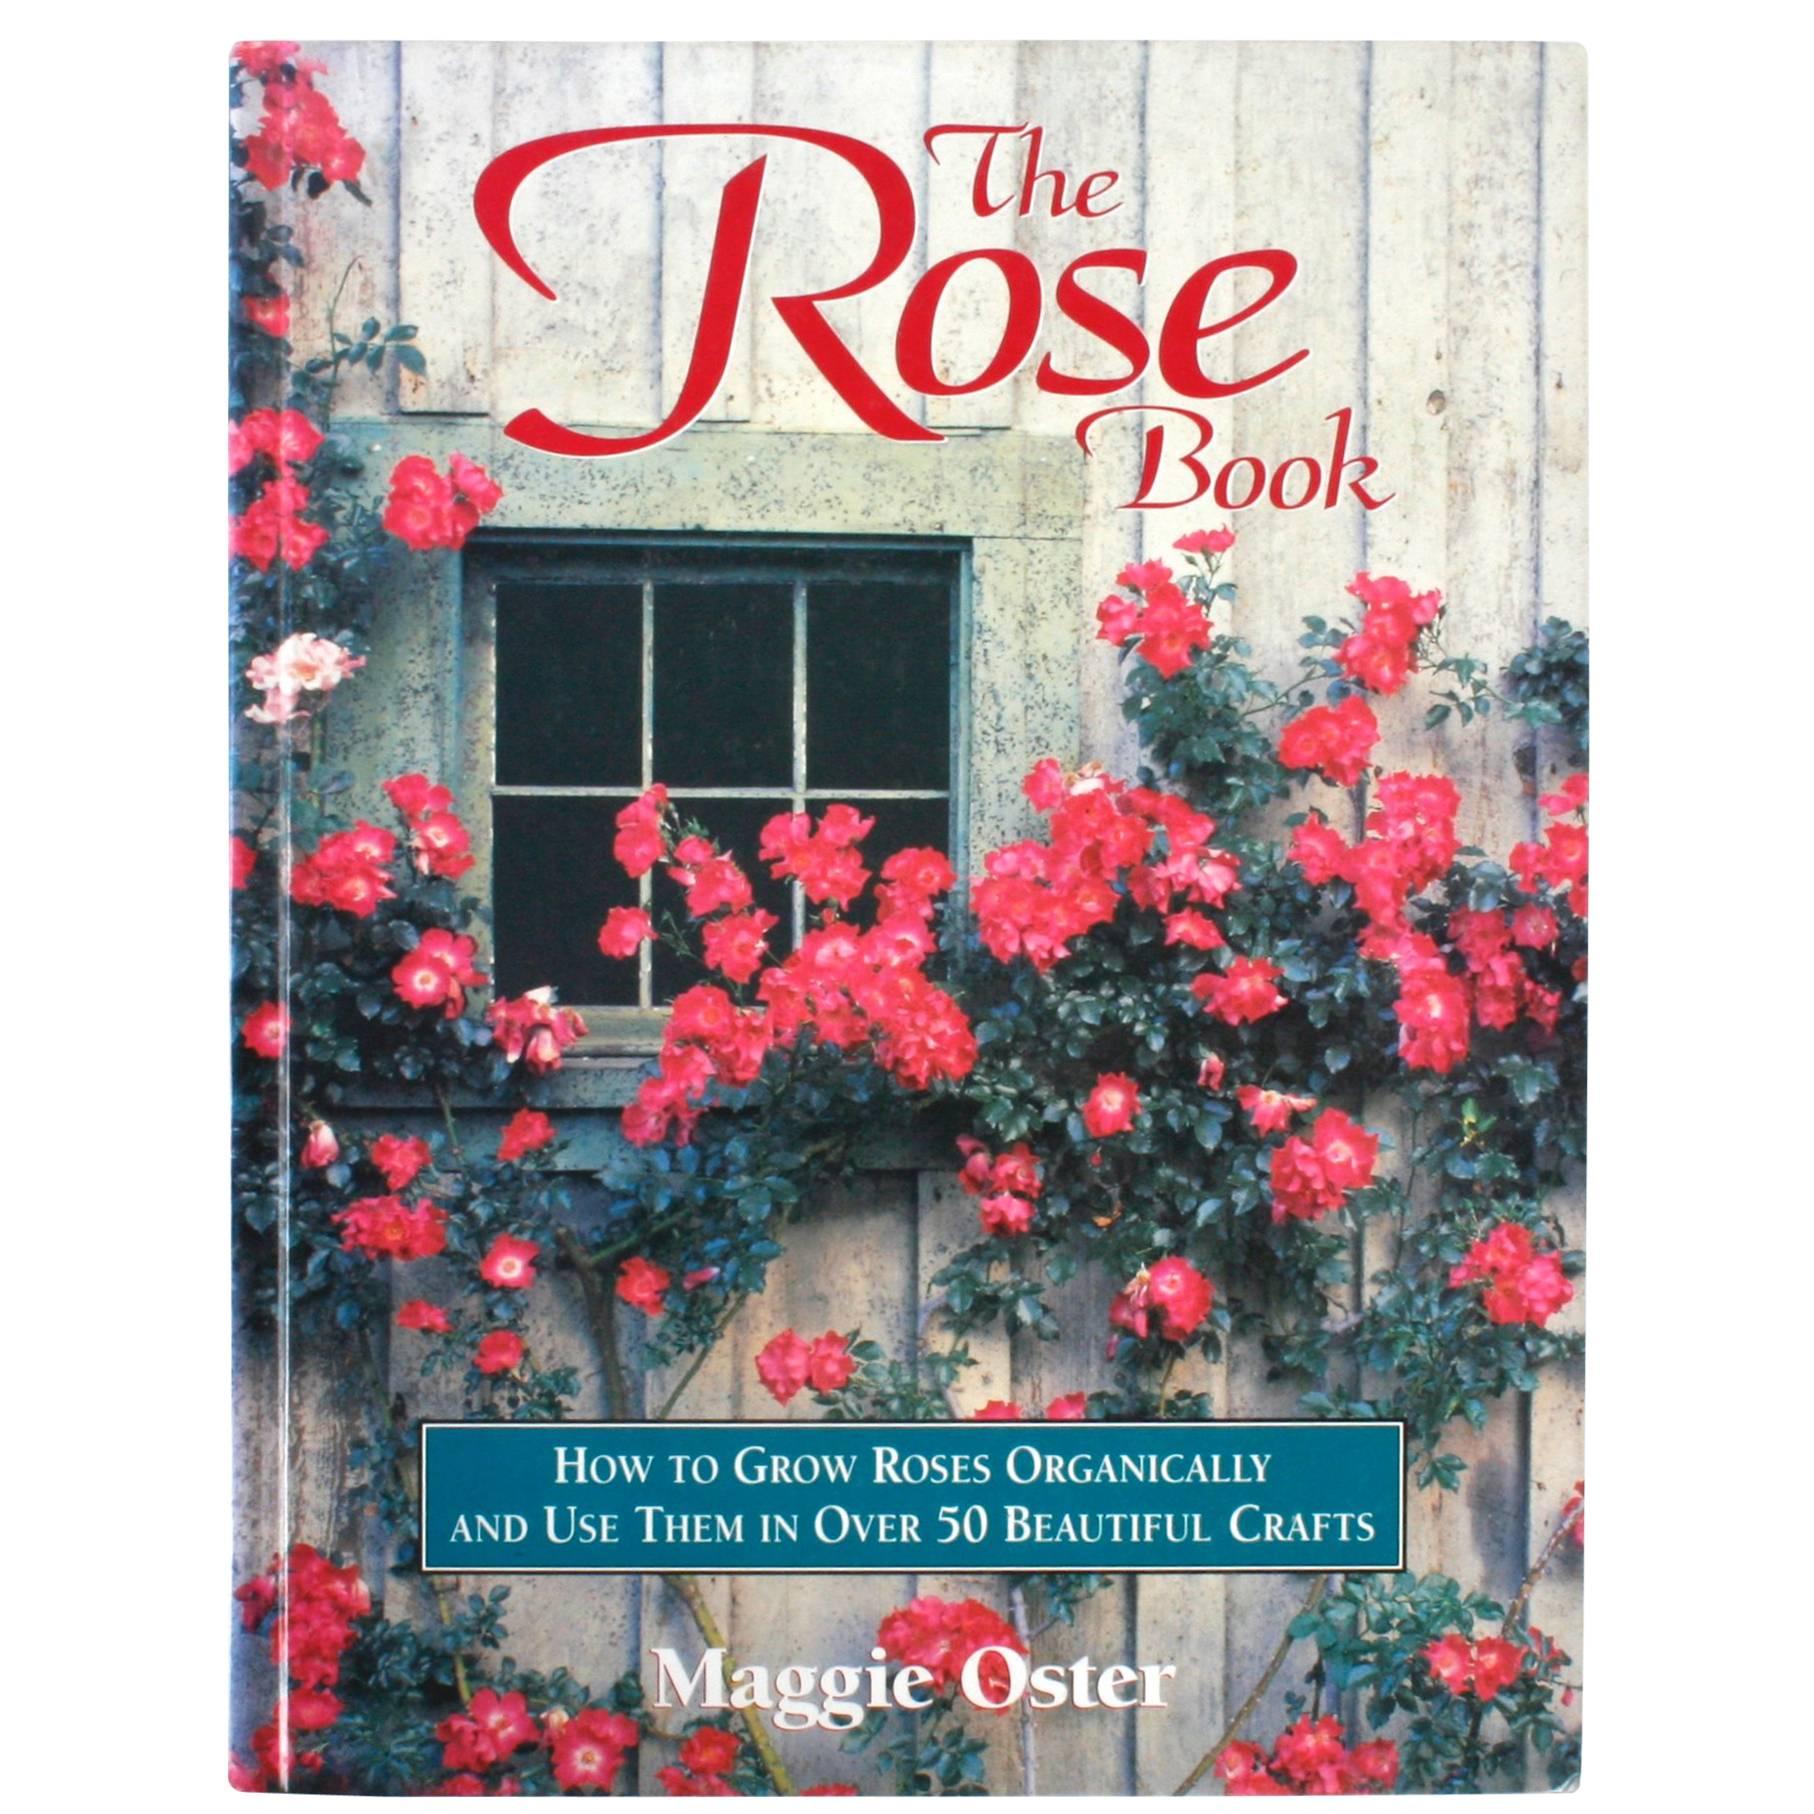 The Rose Book by Maggie Oster